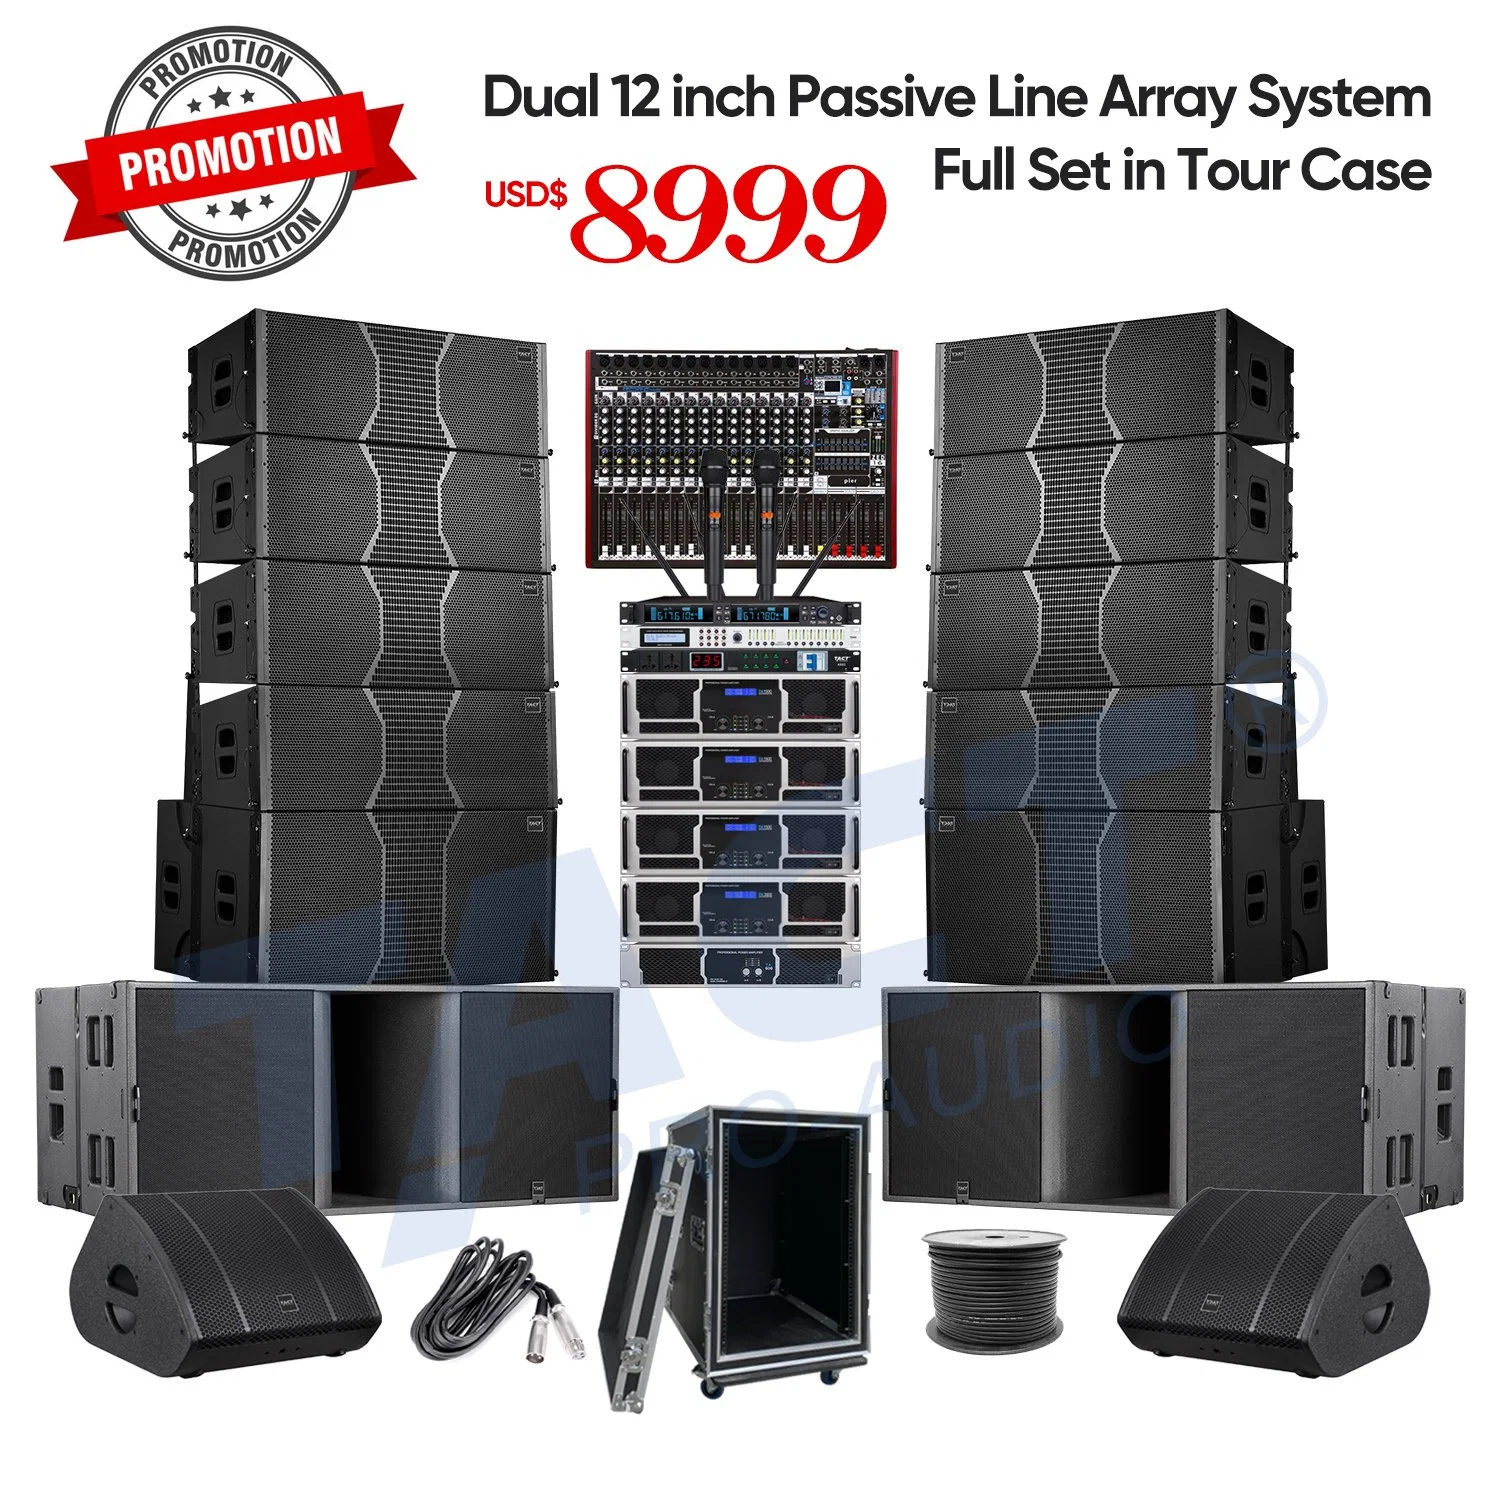 Tact Promotion Price Dual 12 Inch Passive Line Array System